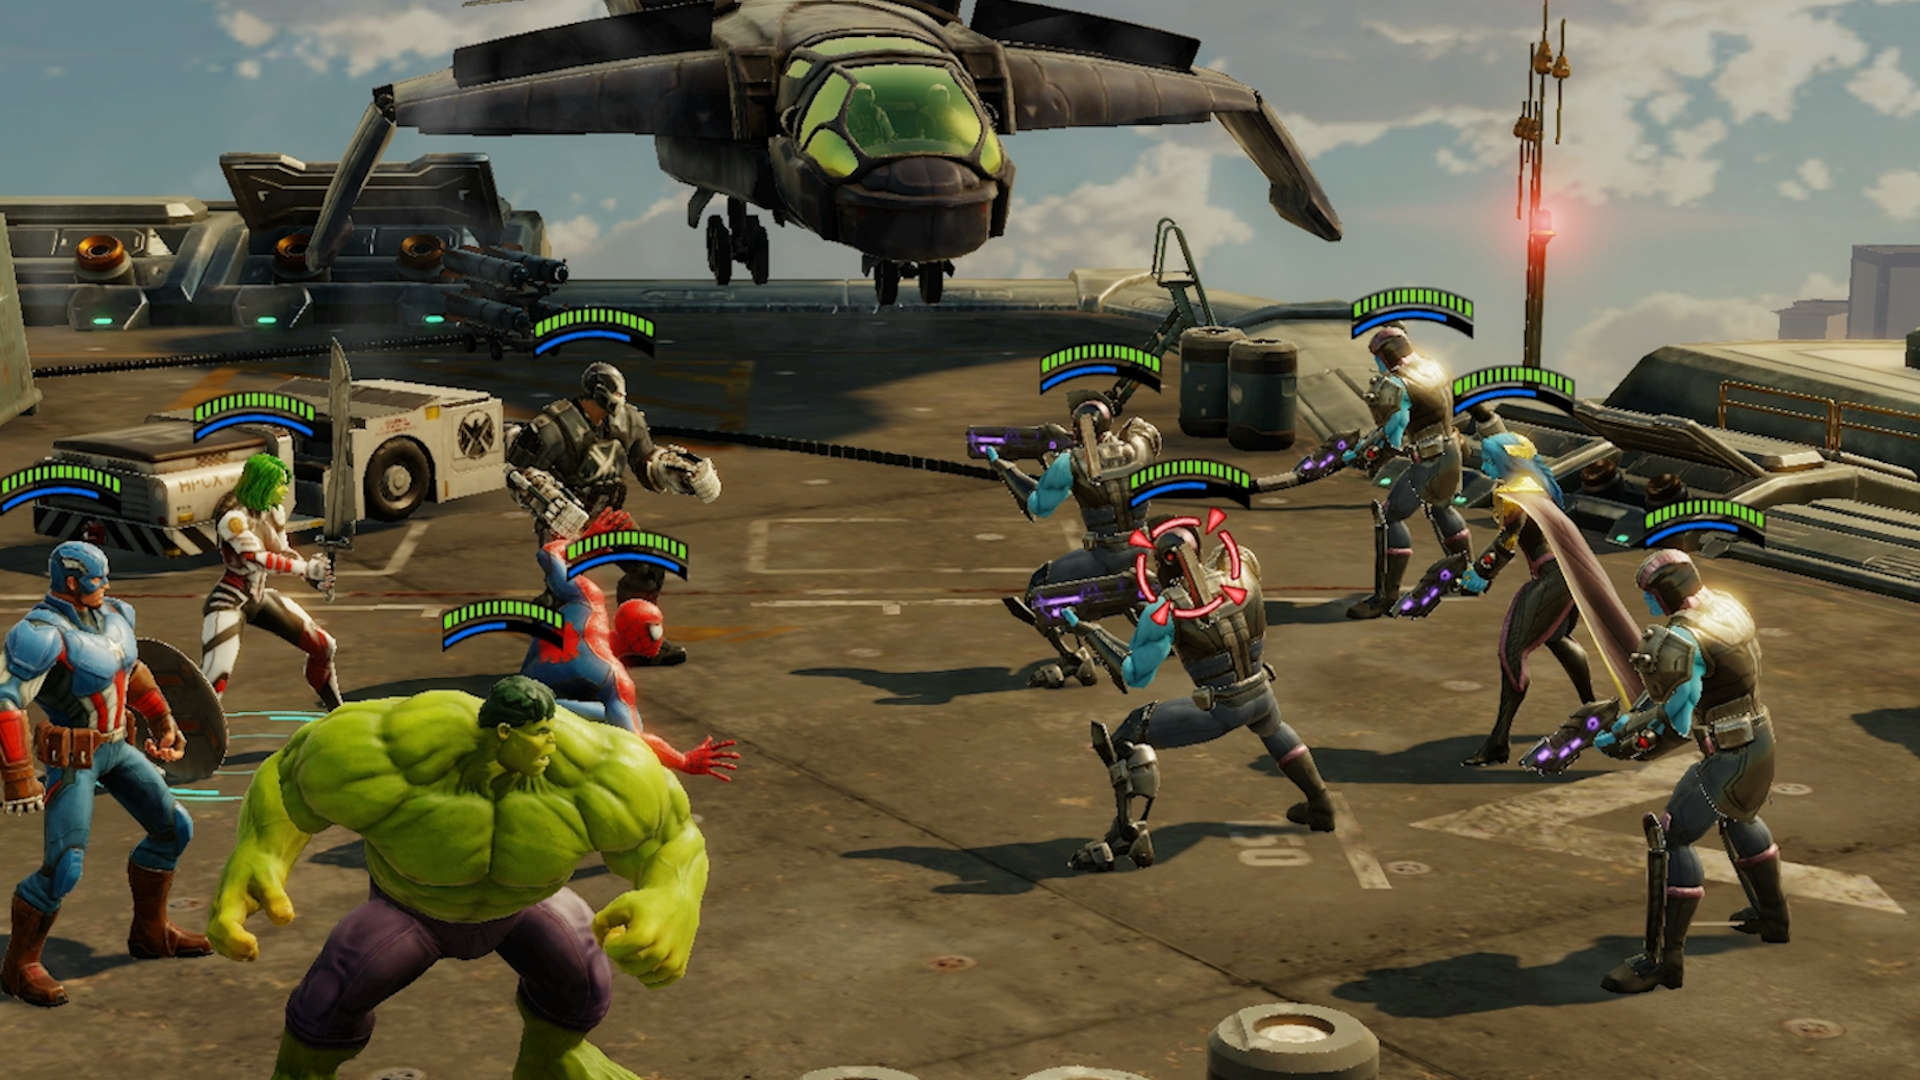 Best gacha games: Marvel Strike Force. Image shows a group of Marvel characters in battle, including Captain America and The Incredible Hulk.